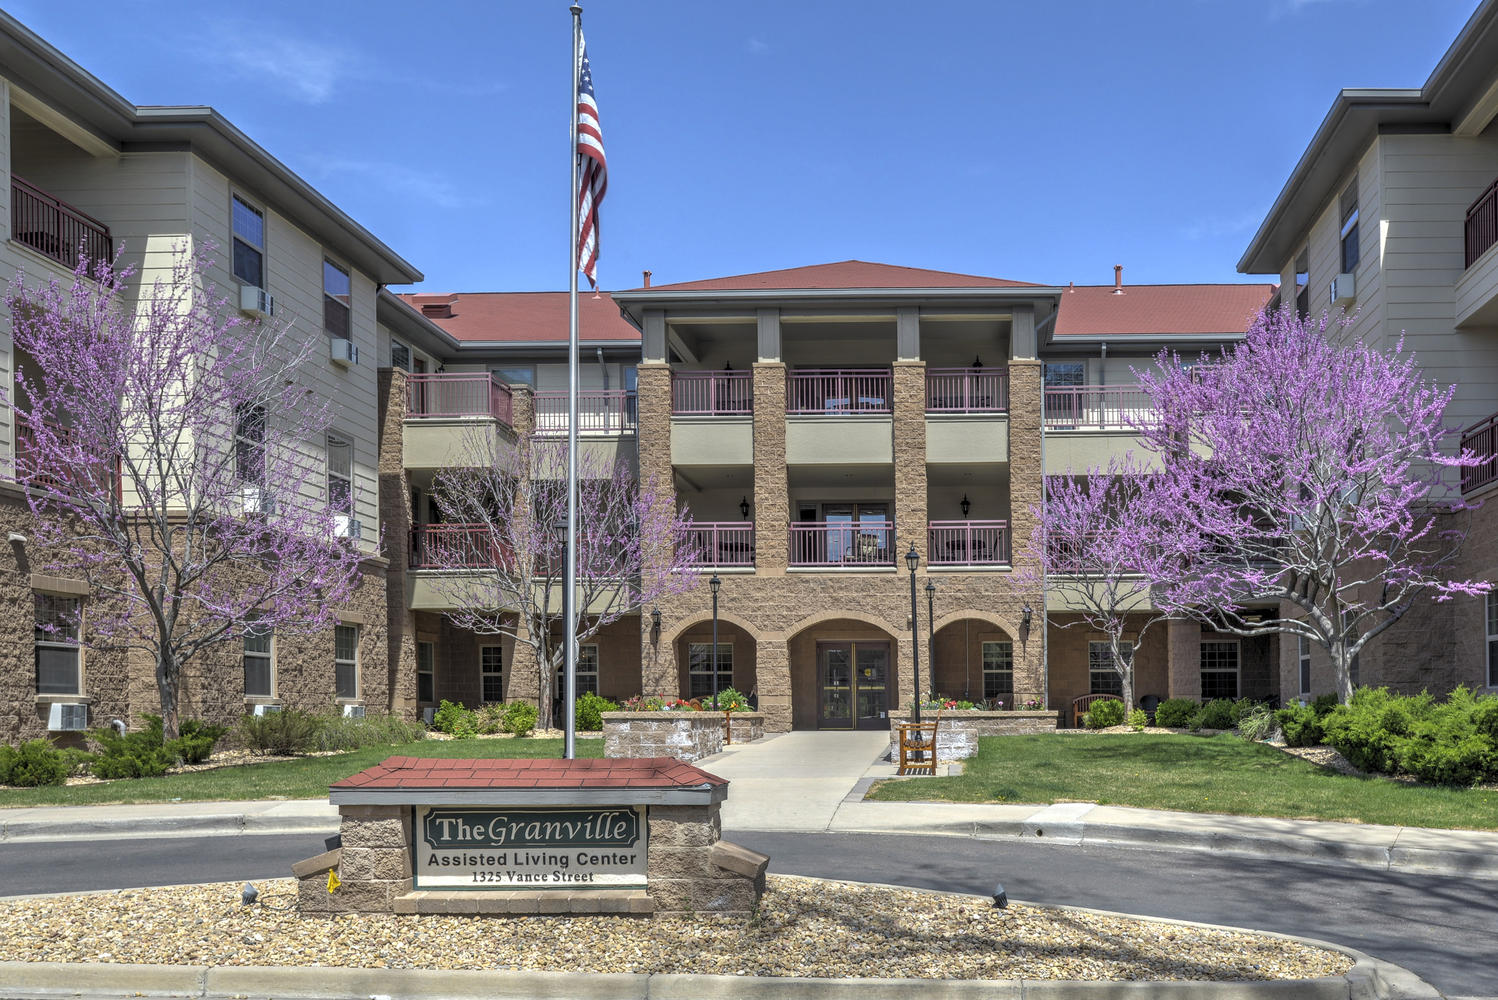 Granville Assisted Living Center, The